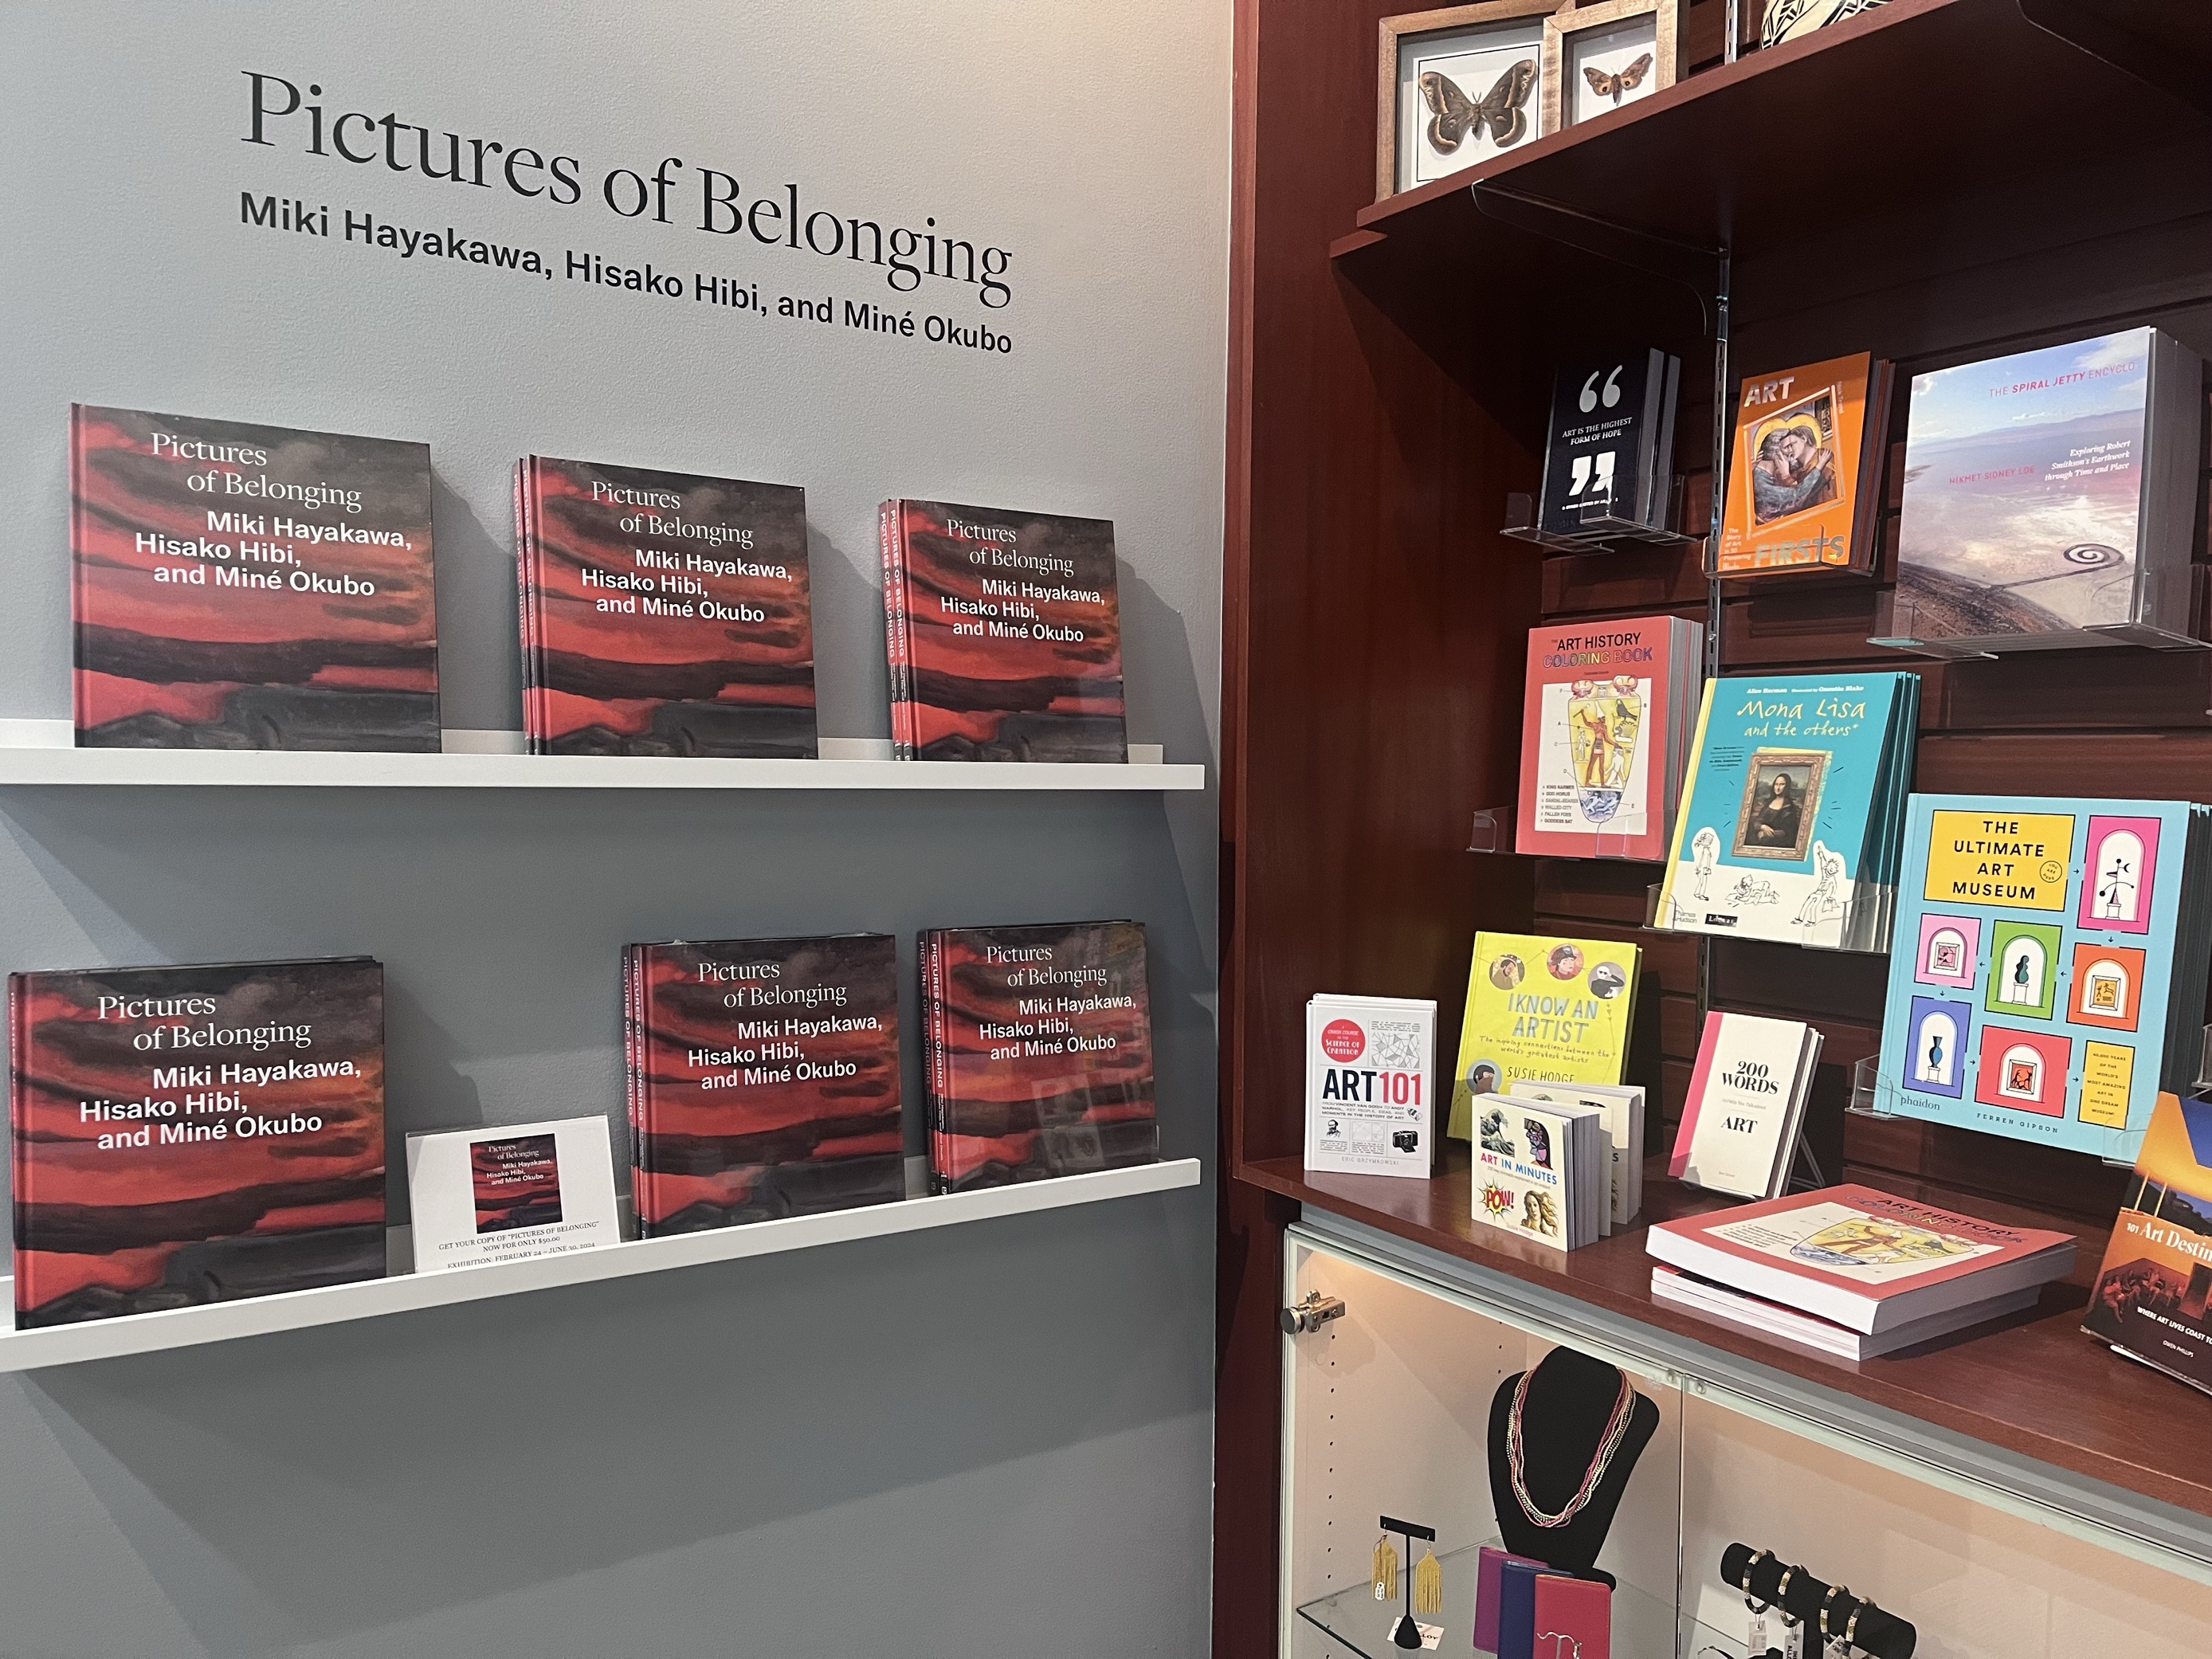 A group of the same book with a black and red cover sit on shelves on a light grey wall beneath a sign that says Pictures of Belonging. There are more books and miscellaneous items on a shelf to the left.